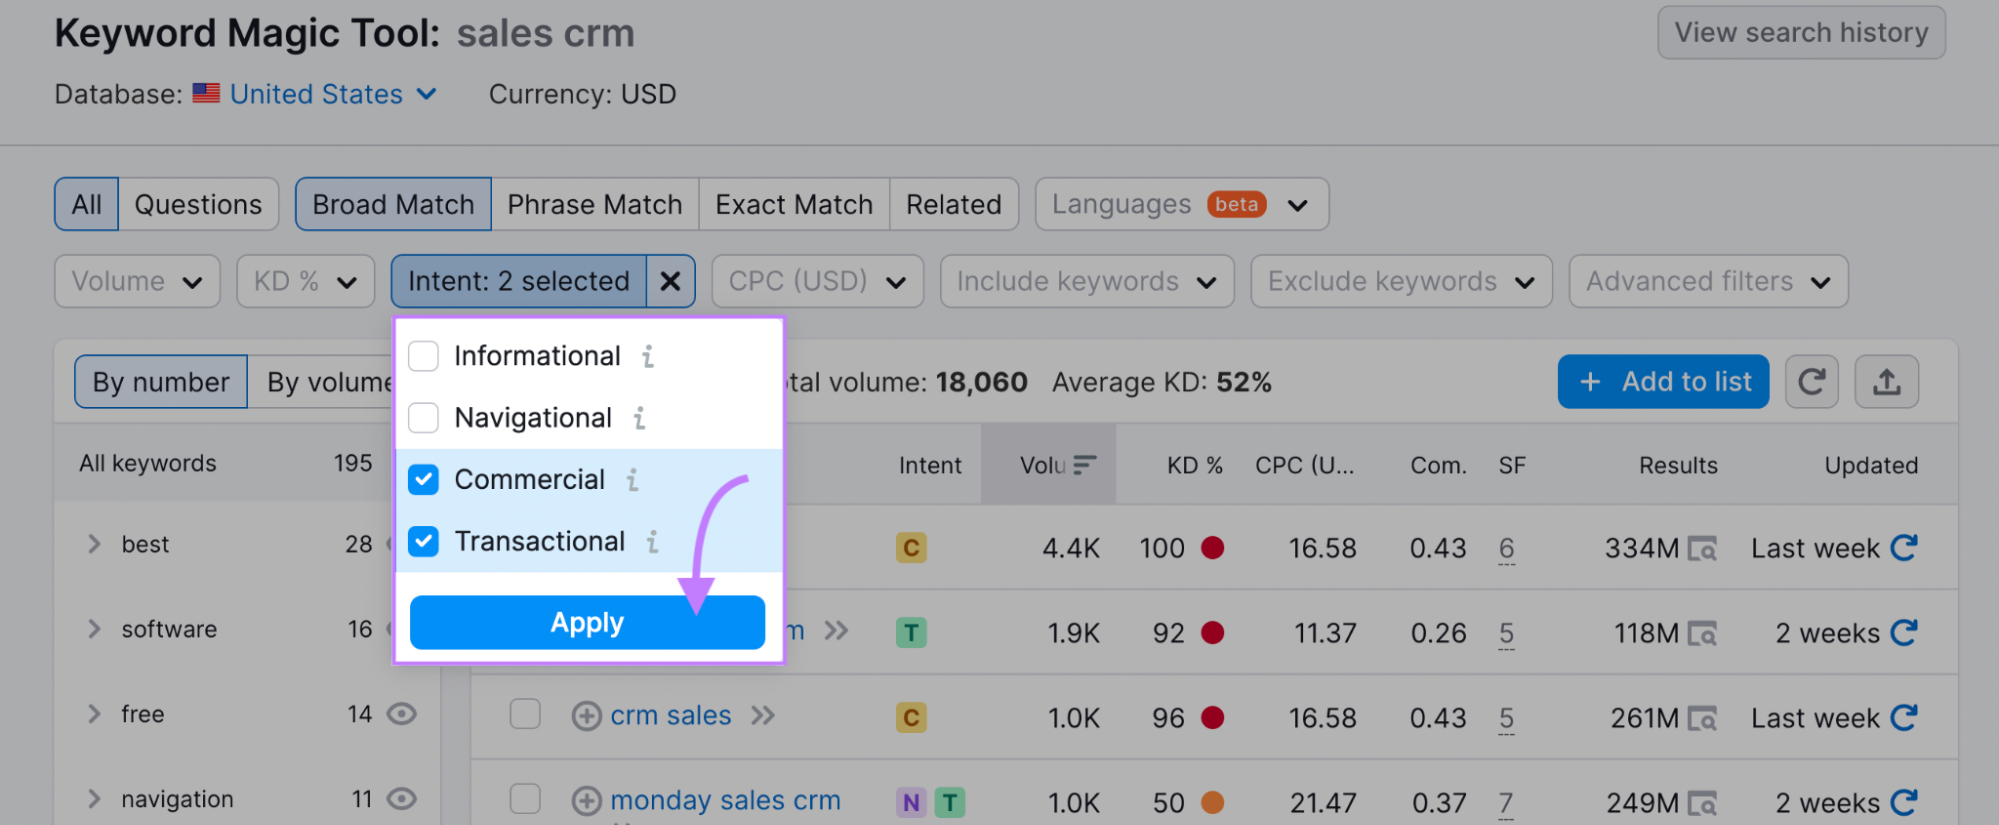 "Intent" filter drop-down menu in Keyword Magic Tool, with "Informational," "Navigational," "Commercial," and "Transactional" options